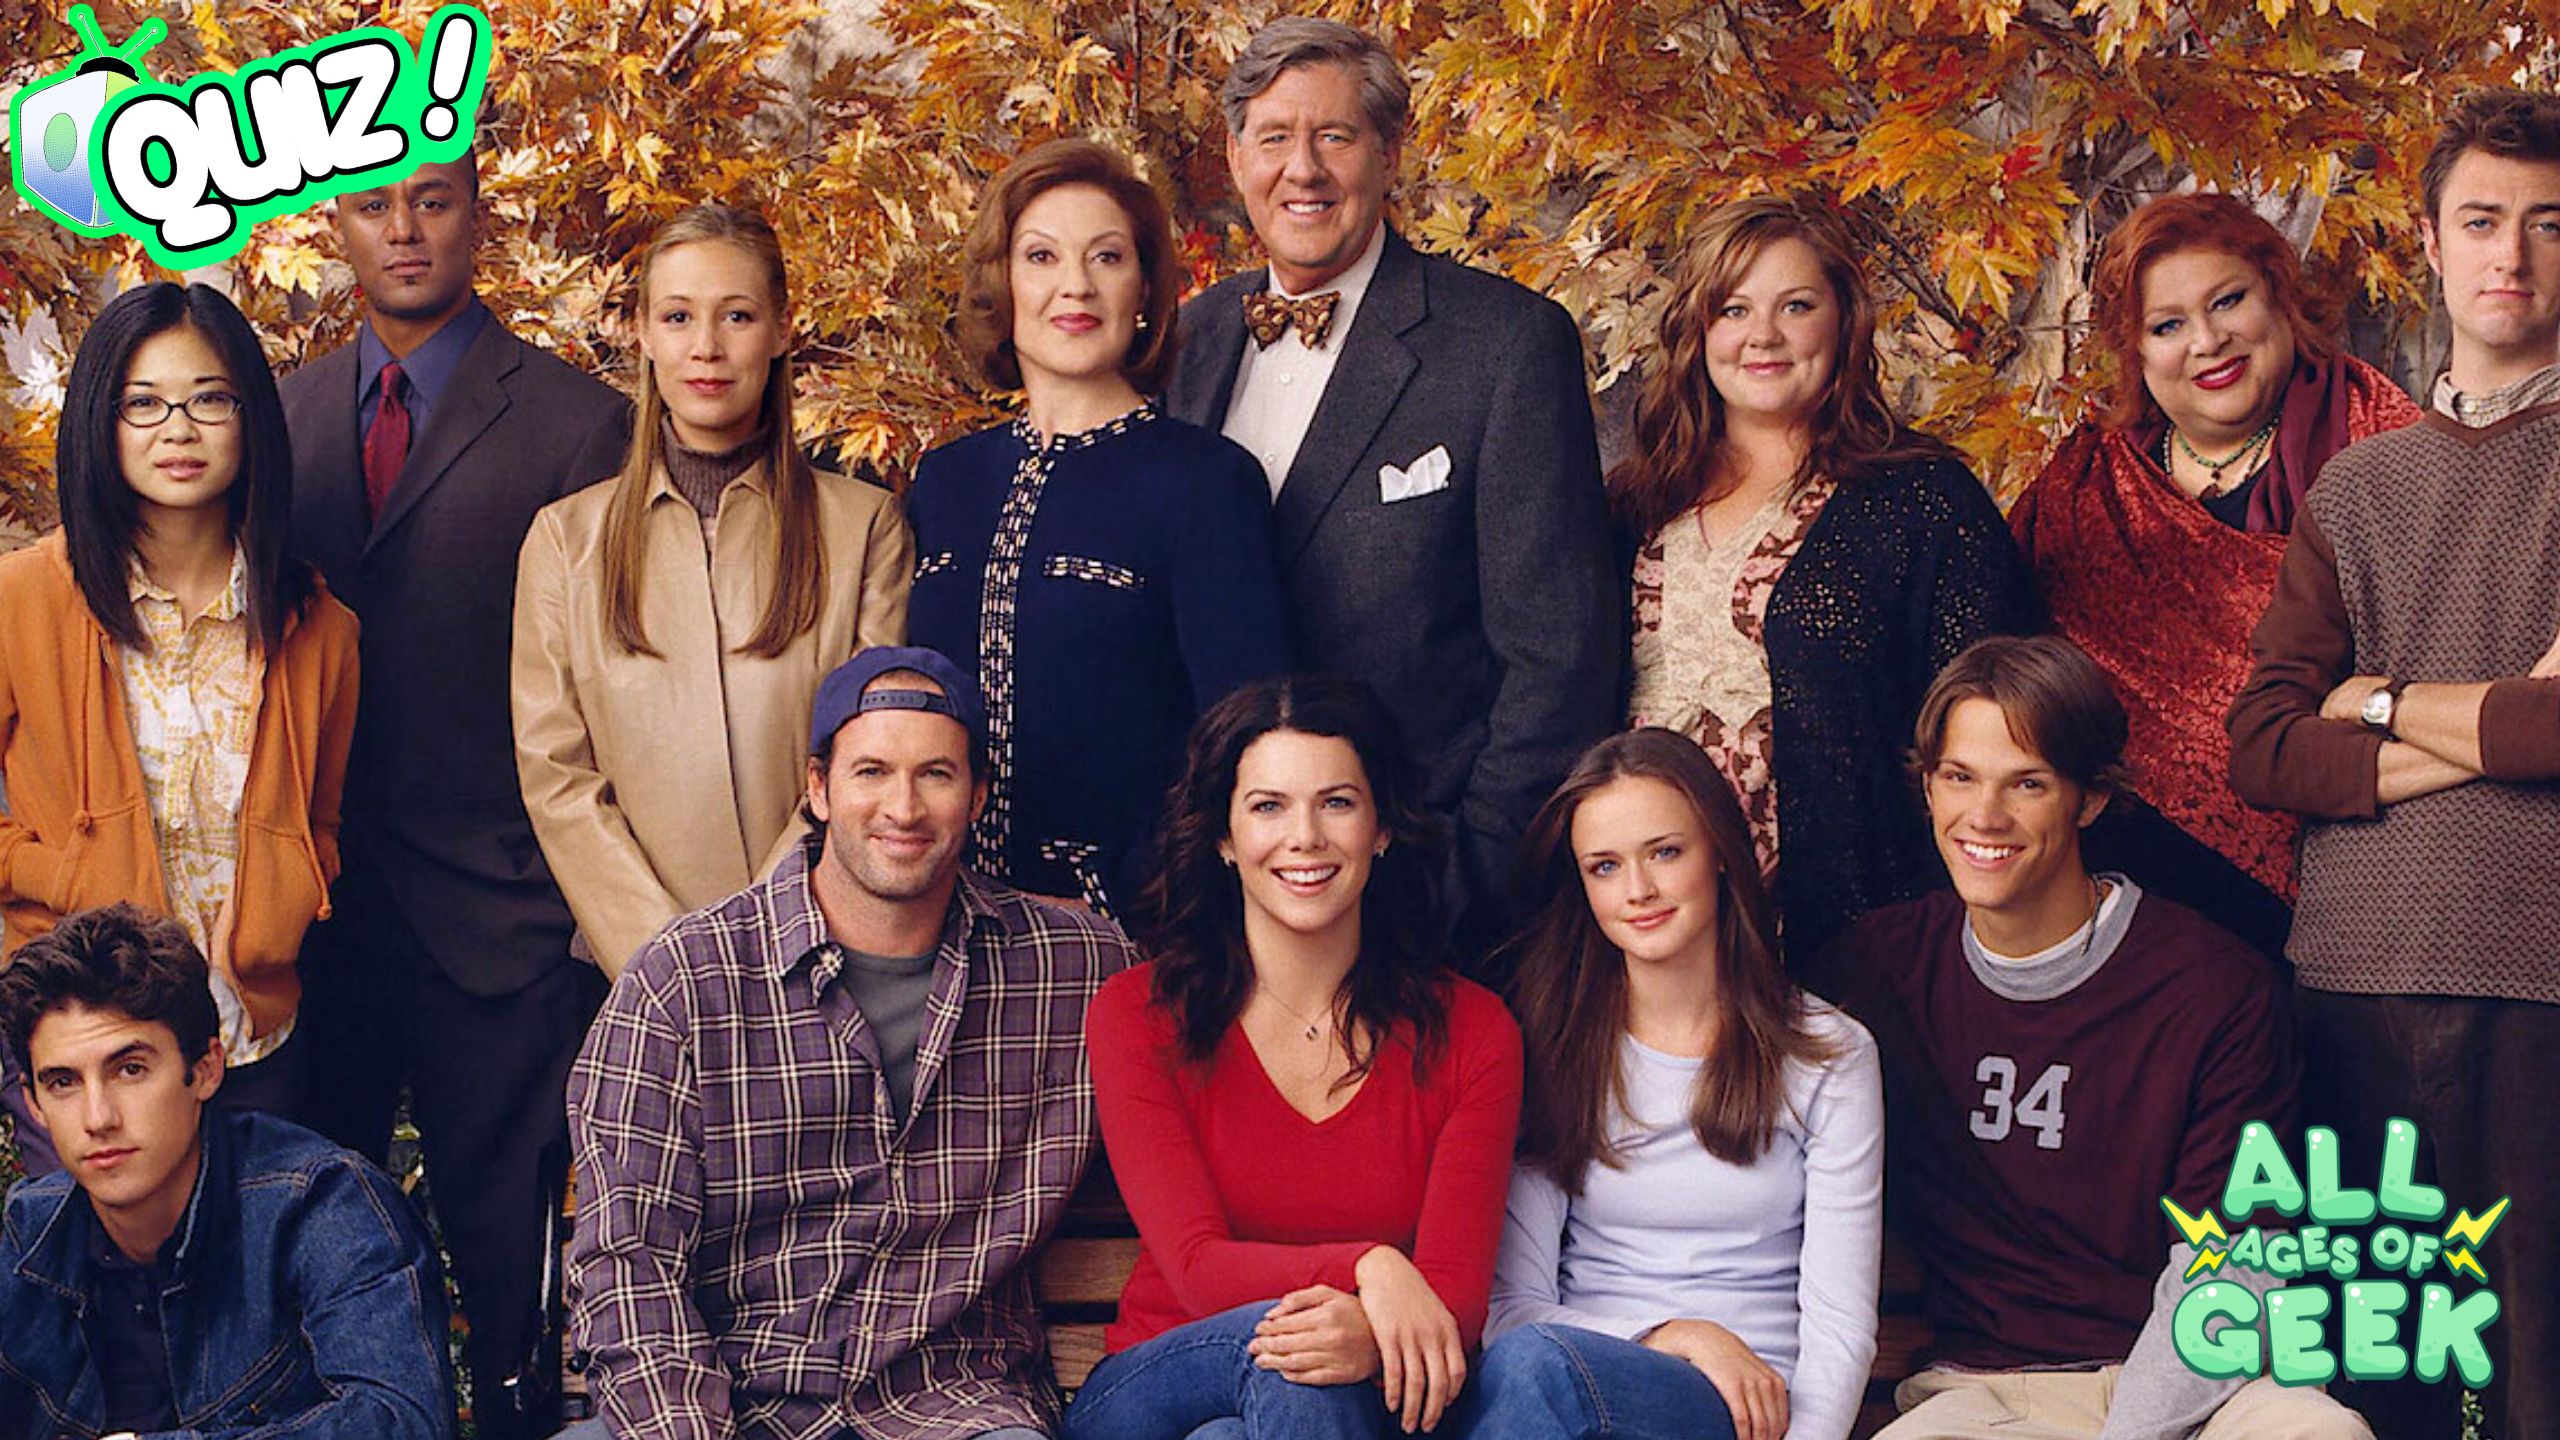 Which “Gilmore Girls” Character Are You? Take the Quiz to Find Out!